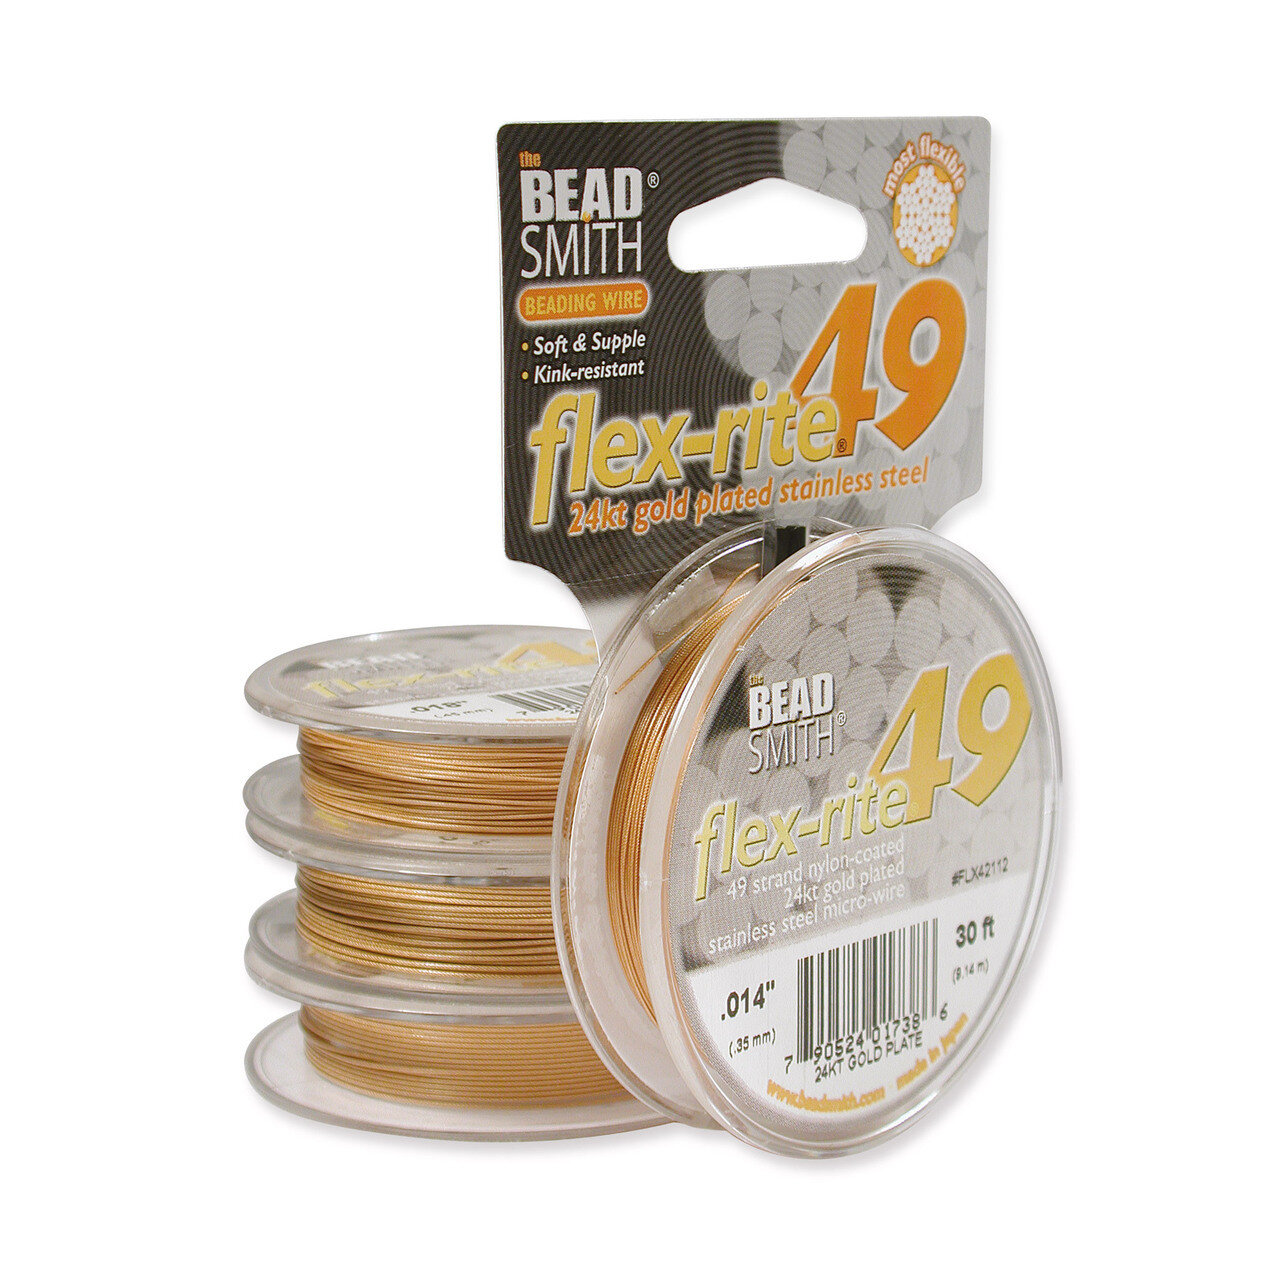 Flex-Rite .024 Inch Diameter 30Ft Strand Wire 24K Gold-plated Stainless Steel CRD830/24-30